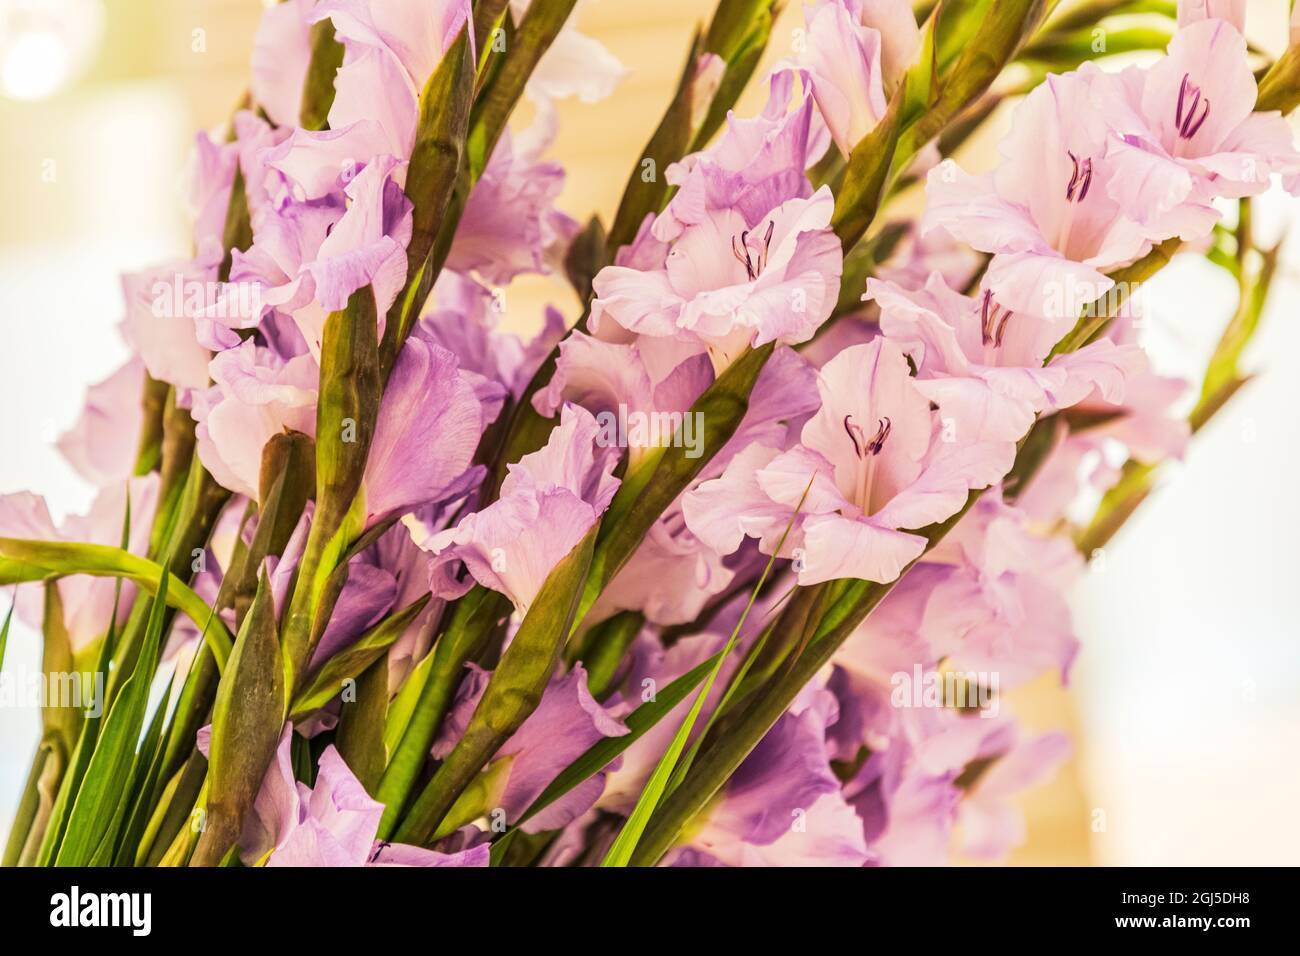 Africa, Egypt. Cairo. Gladiolus or sword lily, a genus of perennial cormous flowering plants in the iris family, Iridaceae. Stock Photo